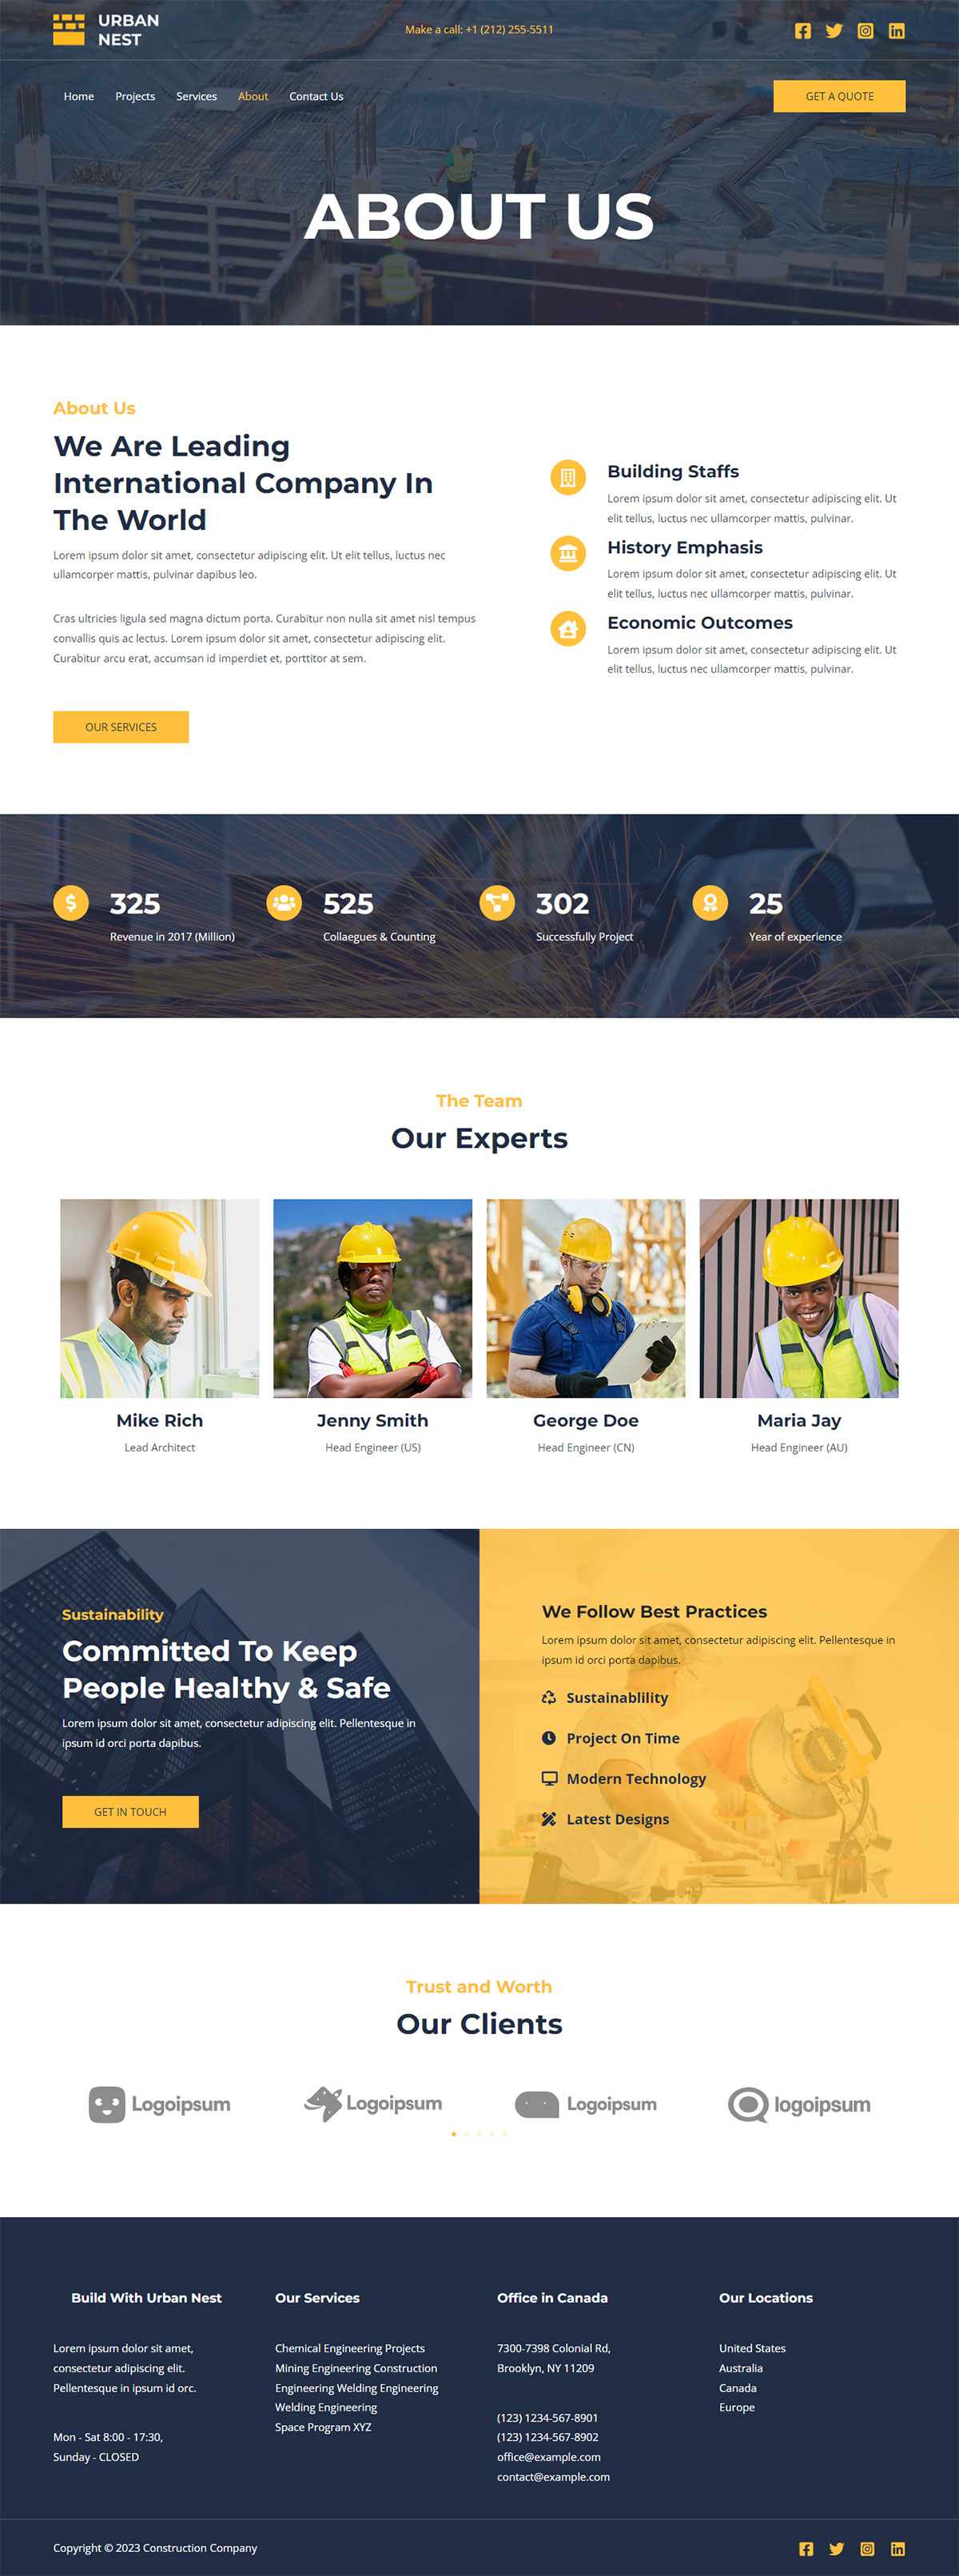 construction-company-02-about